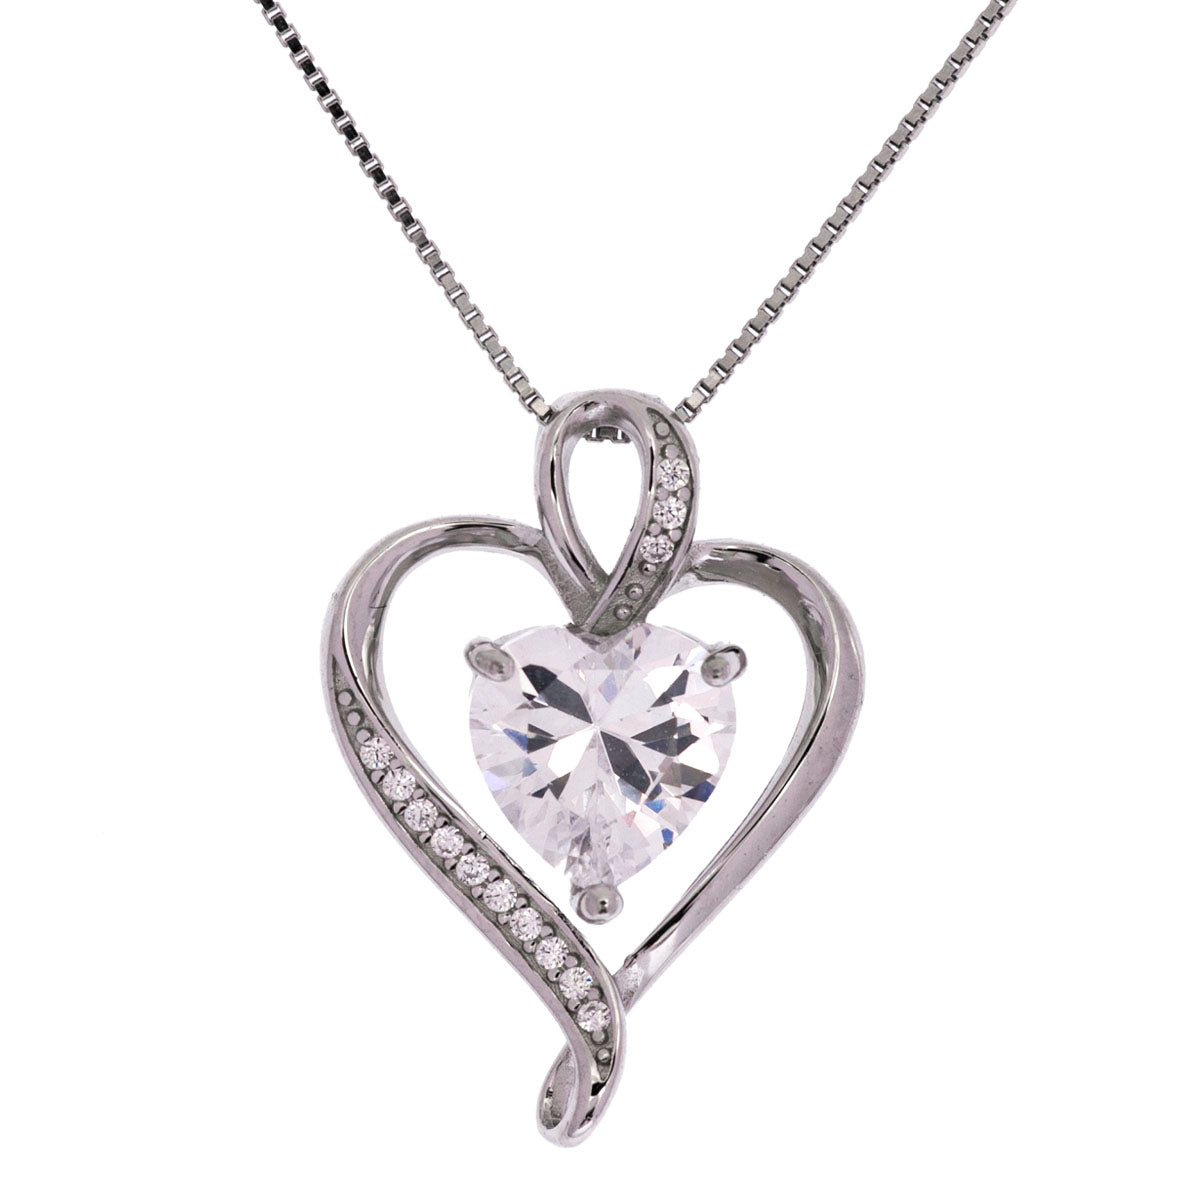 The Day I Met You Ribbon Heart Silver Necklace - Soulmate